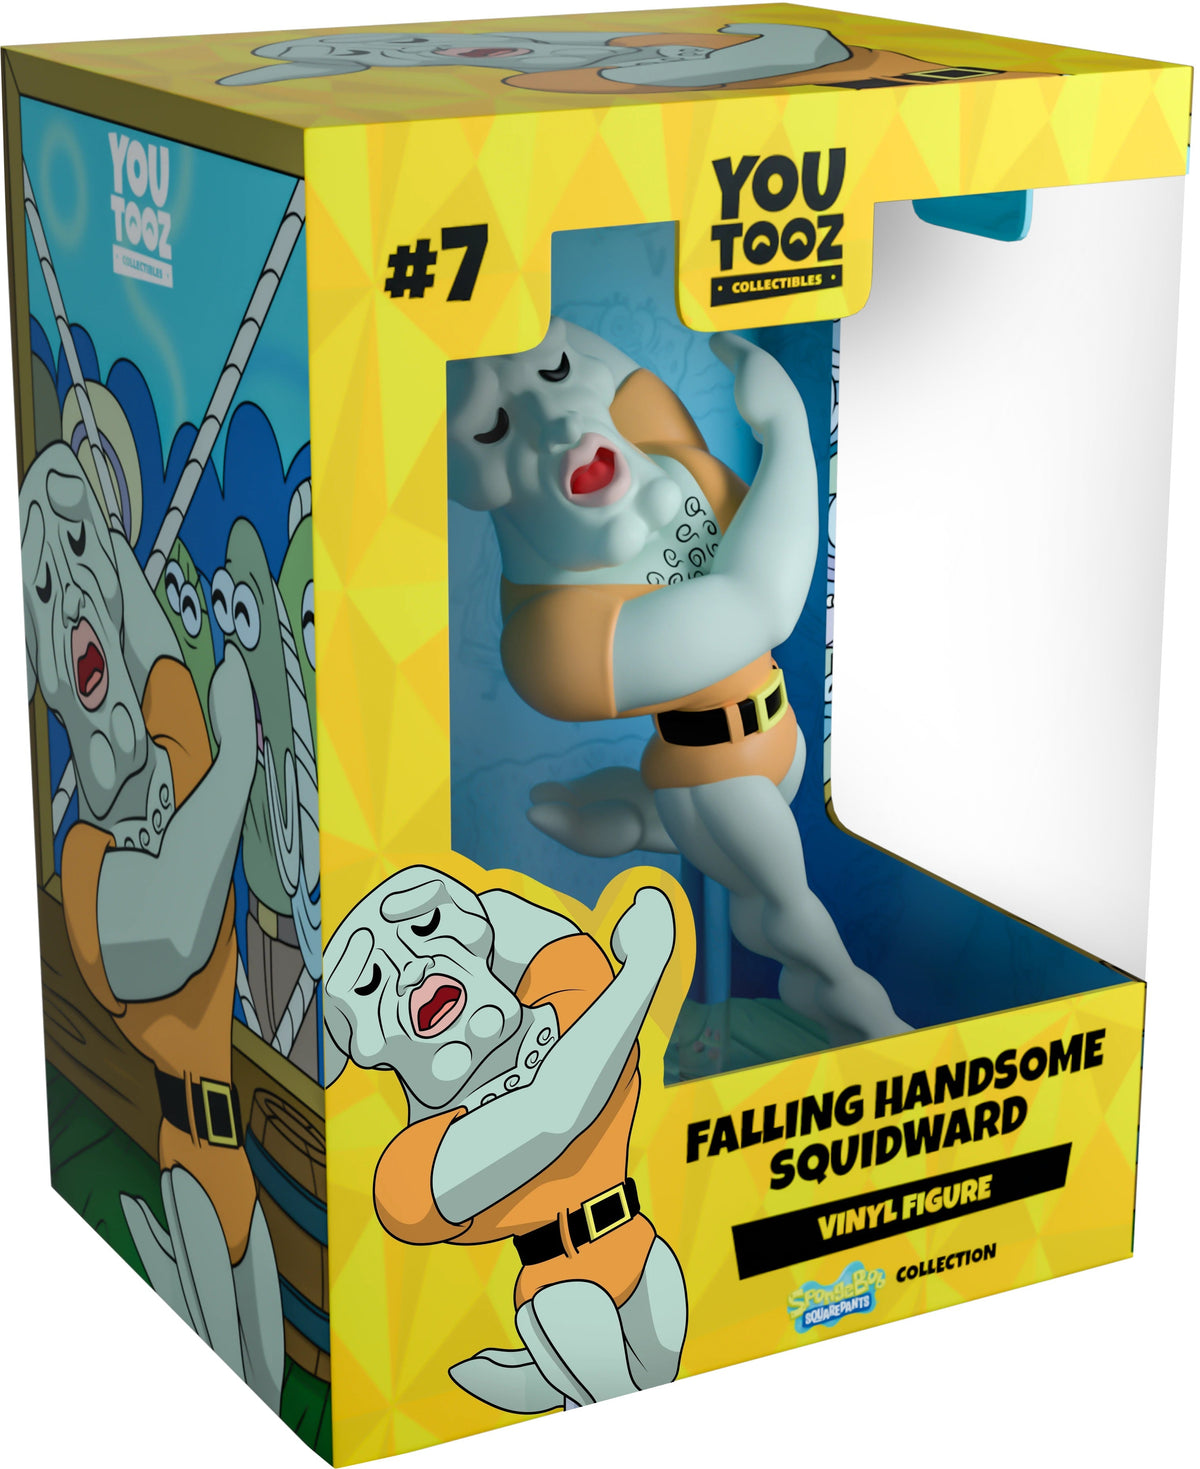 Spongebob Squarepants: Falling Handsome Squidward Toy Figure by Youtooz Collectibles